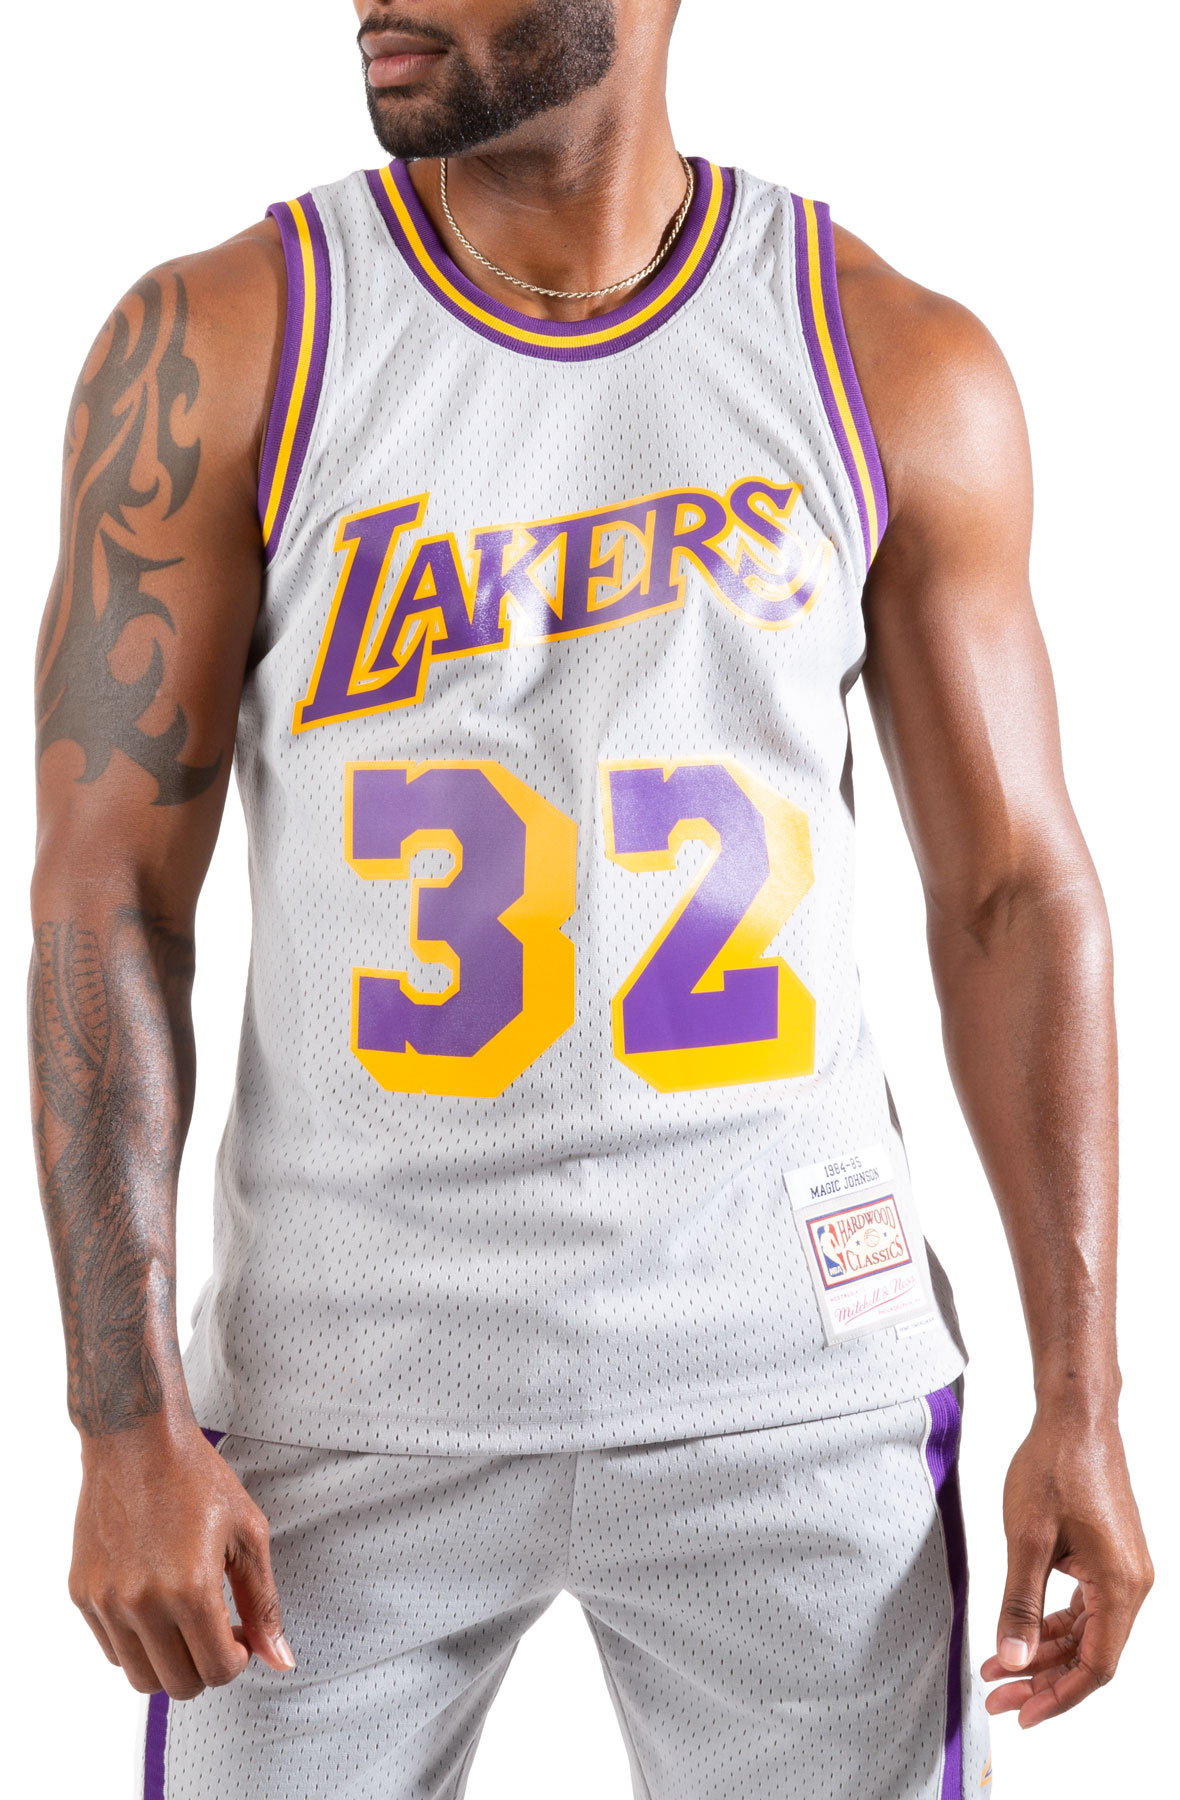 Mitchell & Ness Men's Los Angeles Lakers Reload Collection Swingman Jersey - Shaquille O'Neal - Black